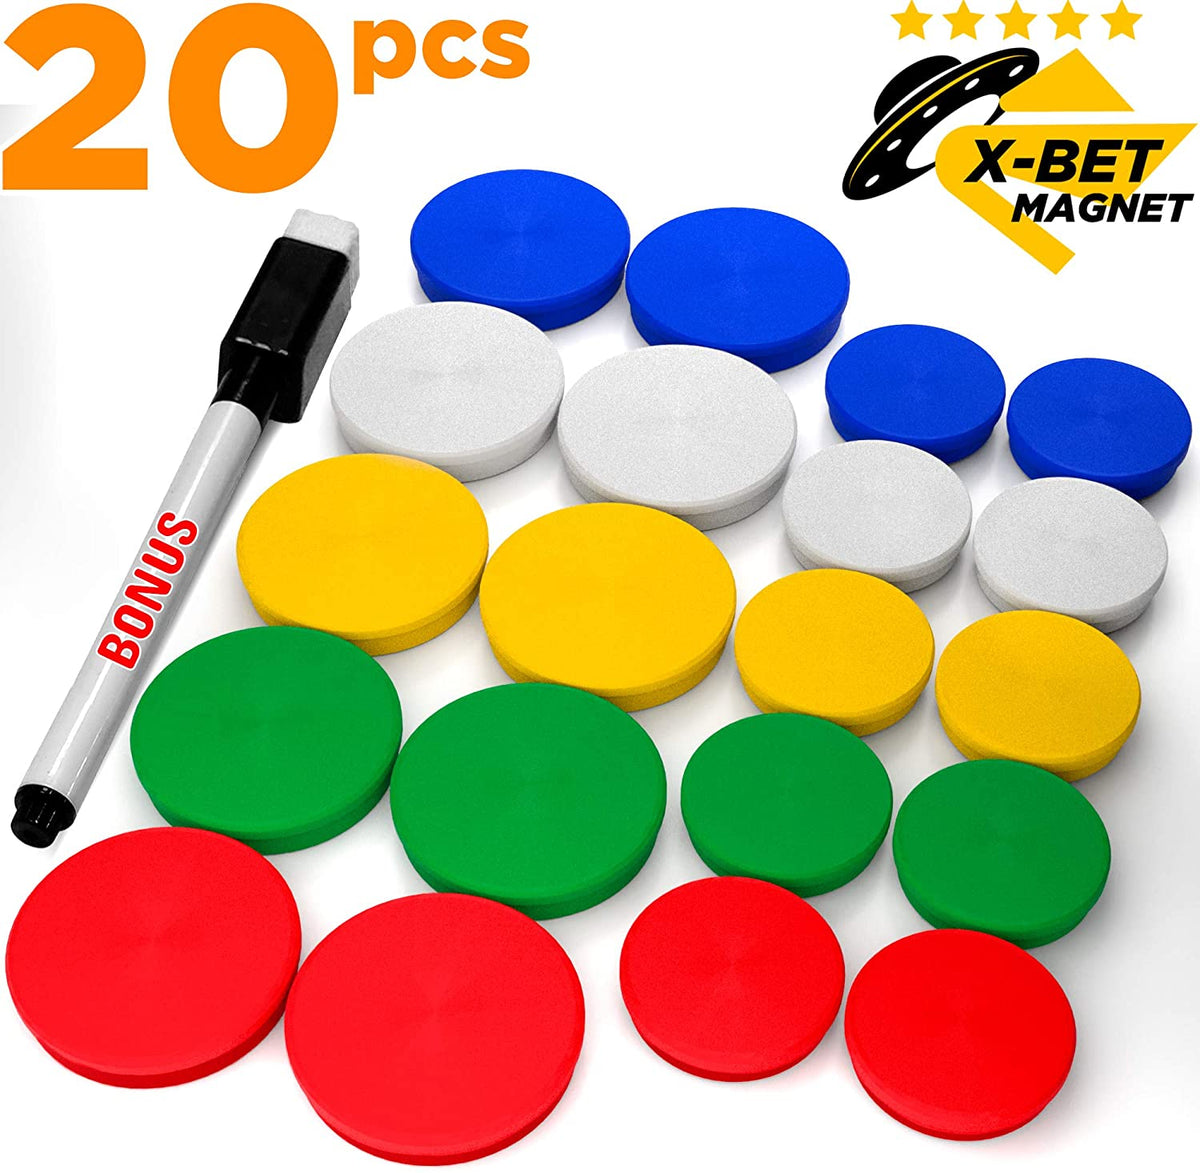 Colored Magnets for Whiteboard 20 PCs - Fridge Magnets